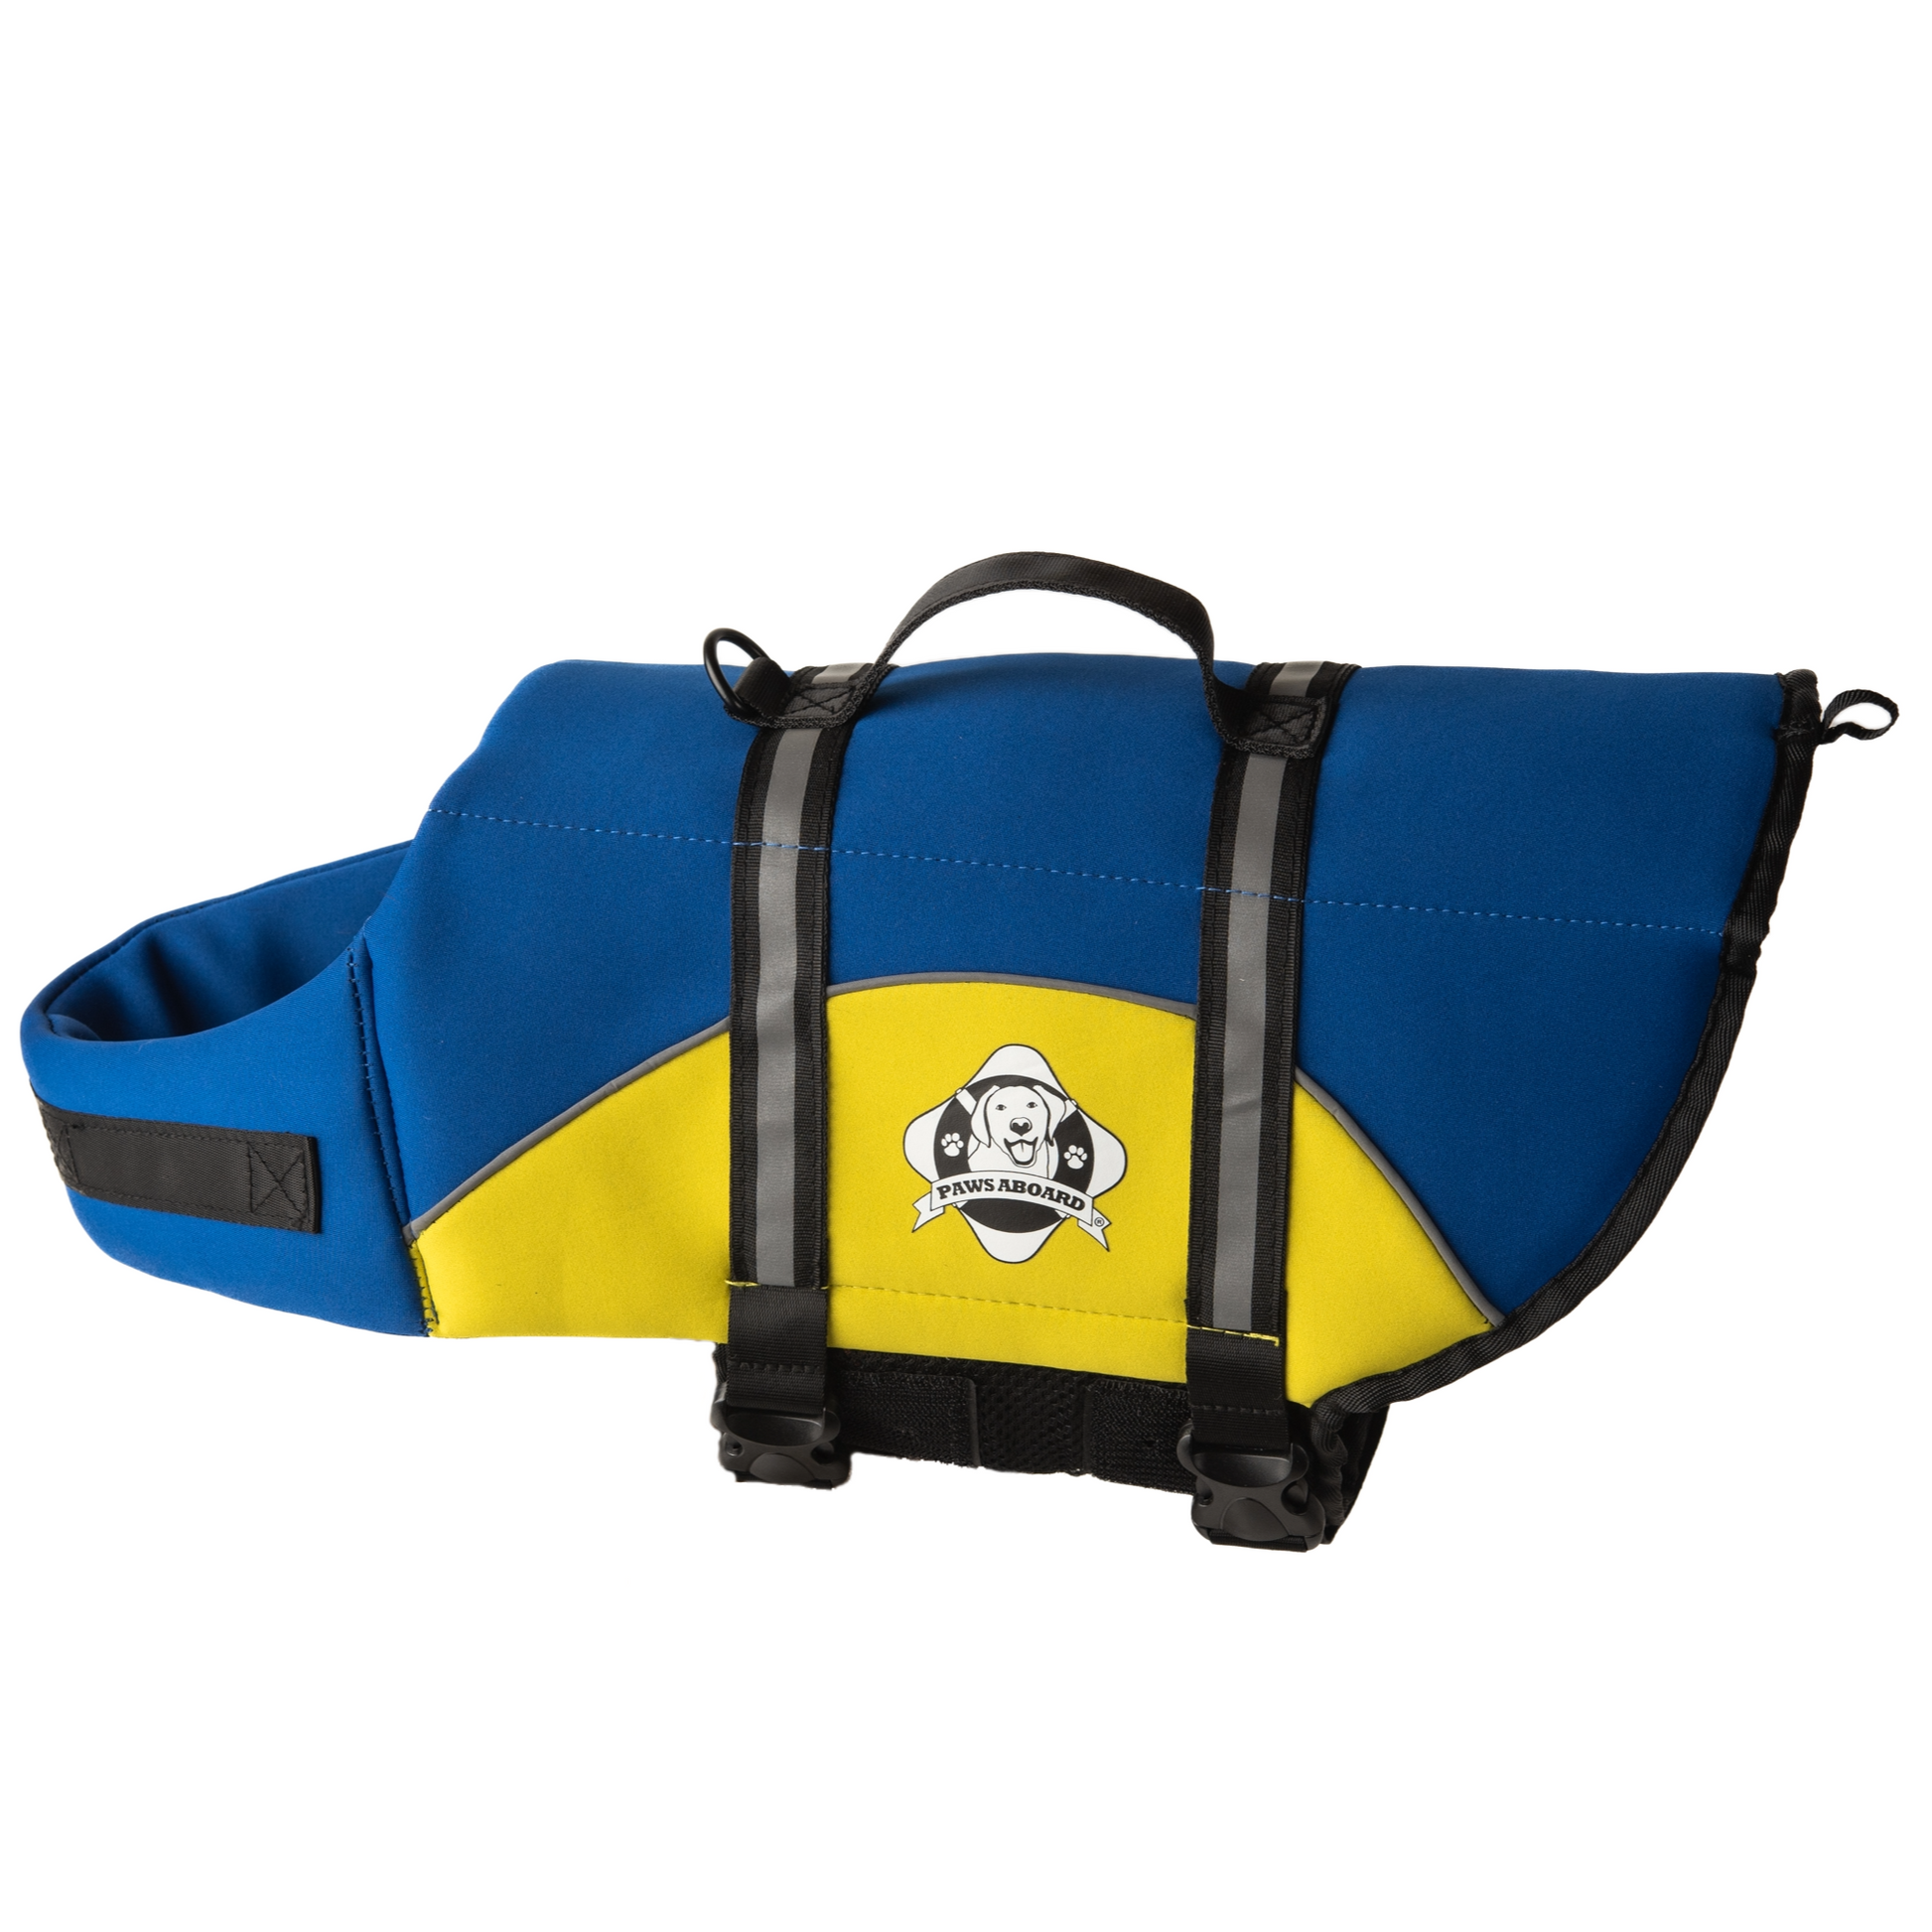 Blue and yellow dog life jacket with breathable mesh underbelly, reflective straps for high visibility, leash clip, and a top handle. Featuring Paws Aboard logo of a dog with a blue life ring around neck.